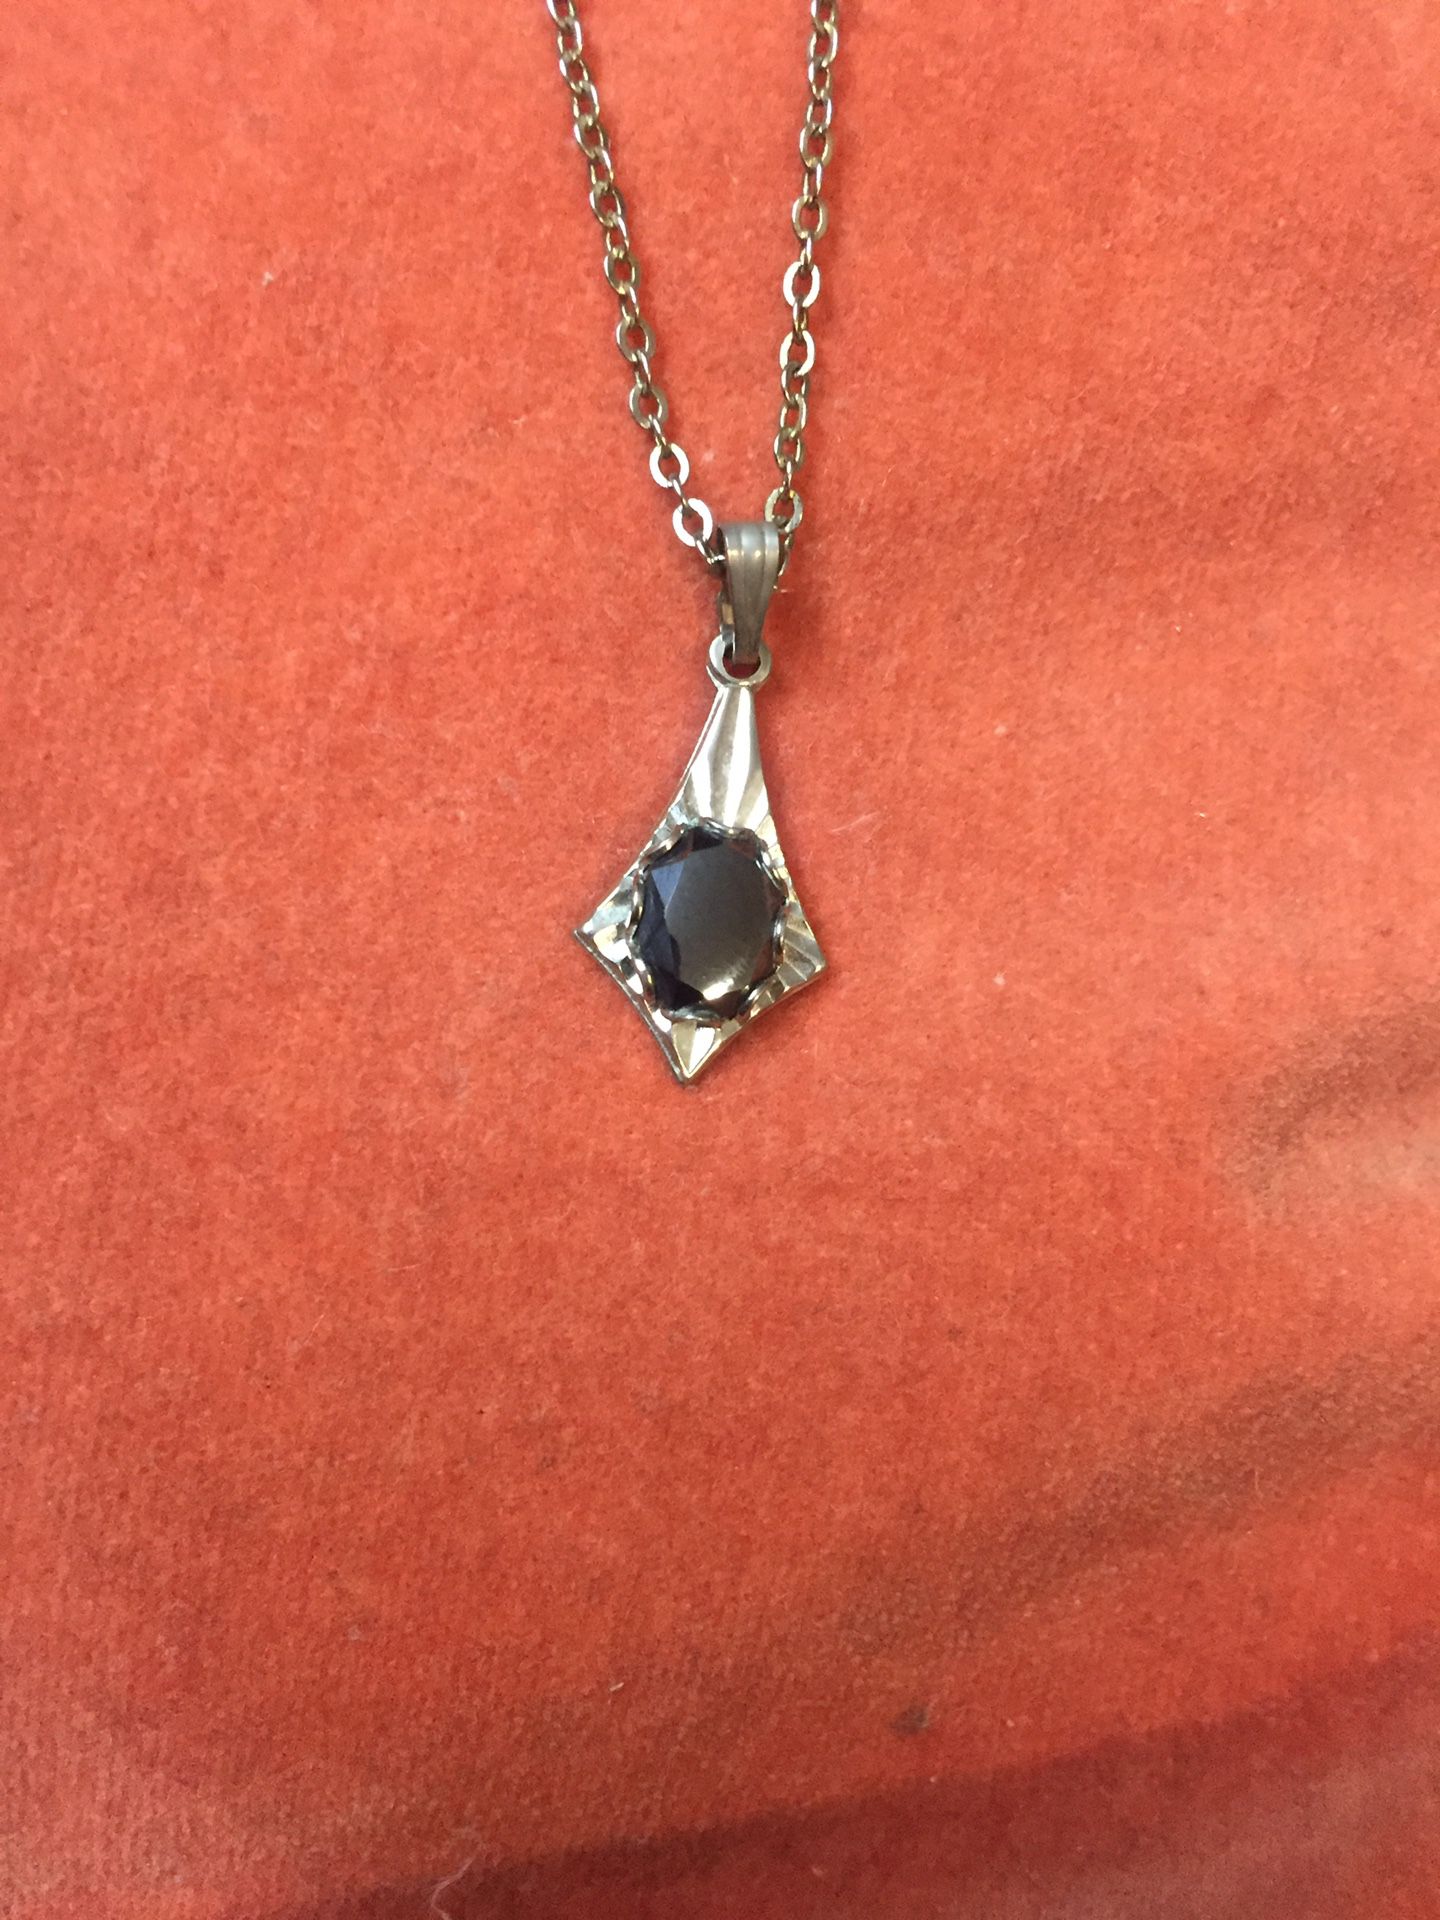 Silver a pendent with metal chain